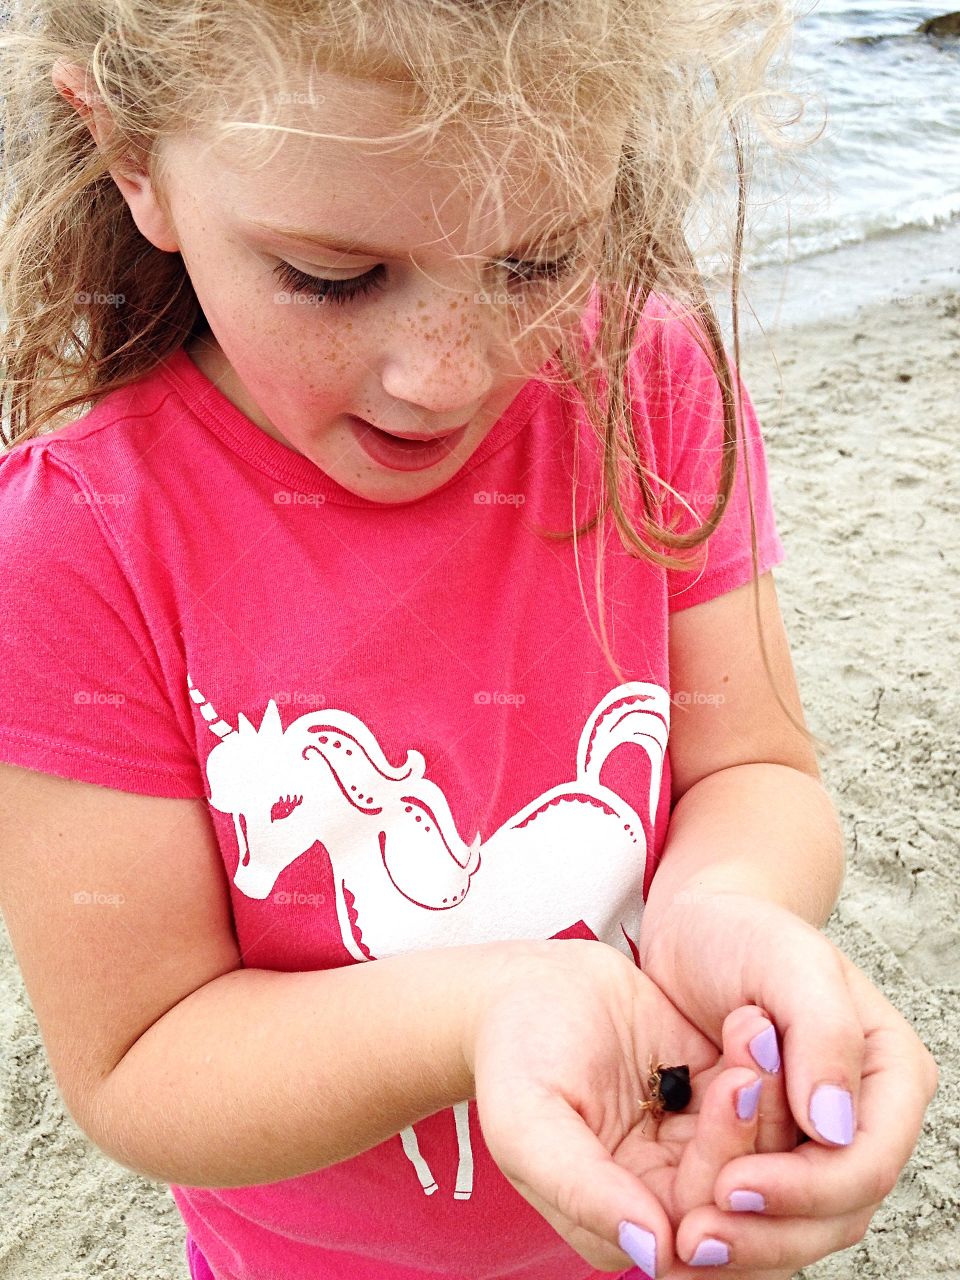 Look what I caught!  Exploring the water, she caught a hermit crab. 